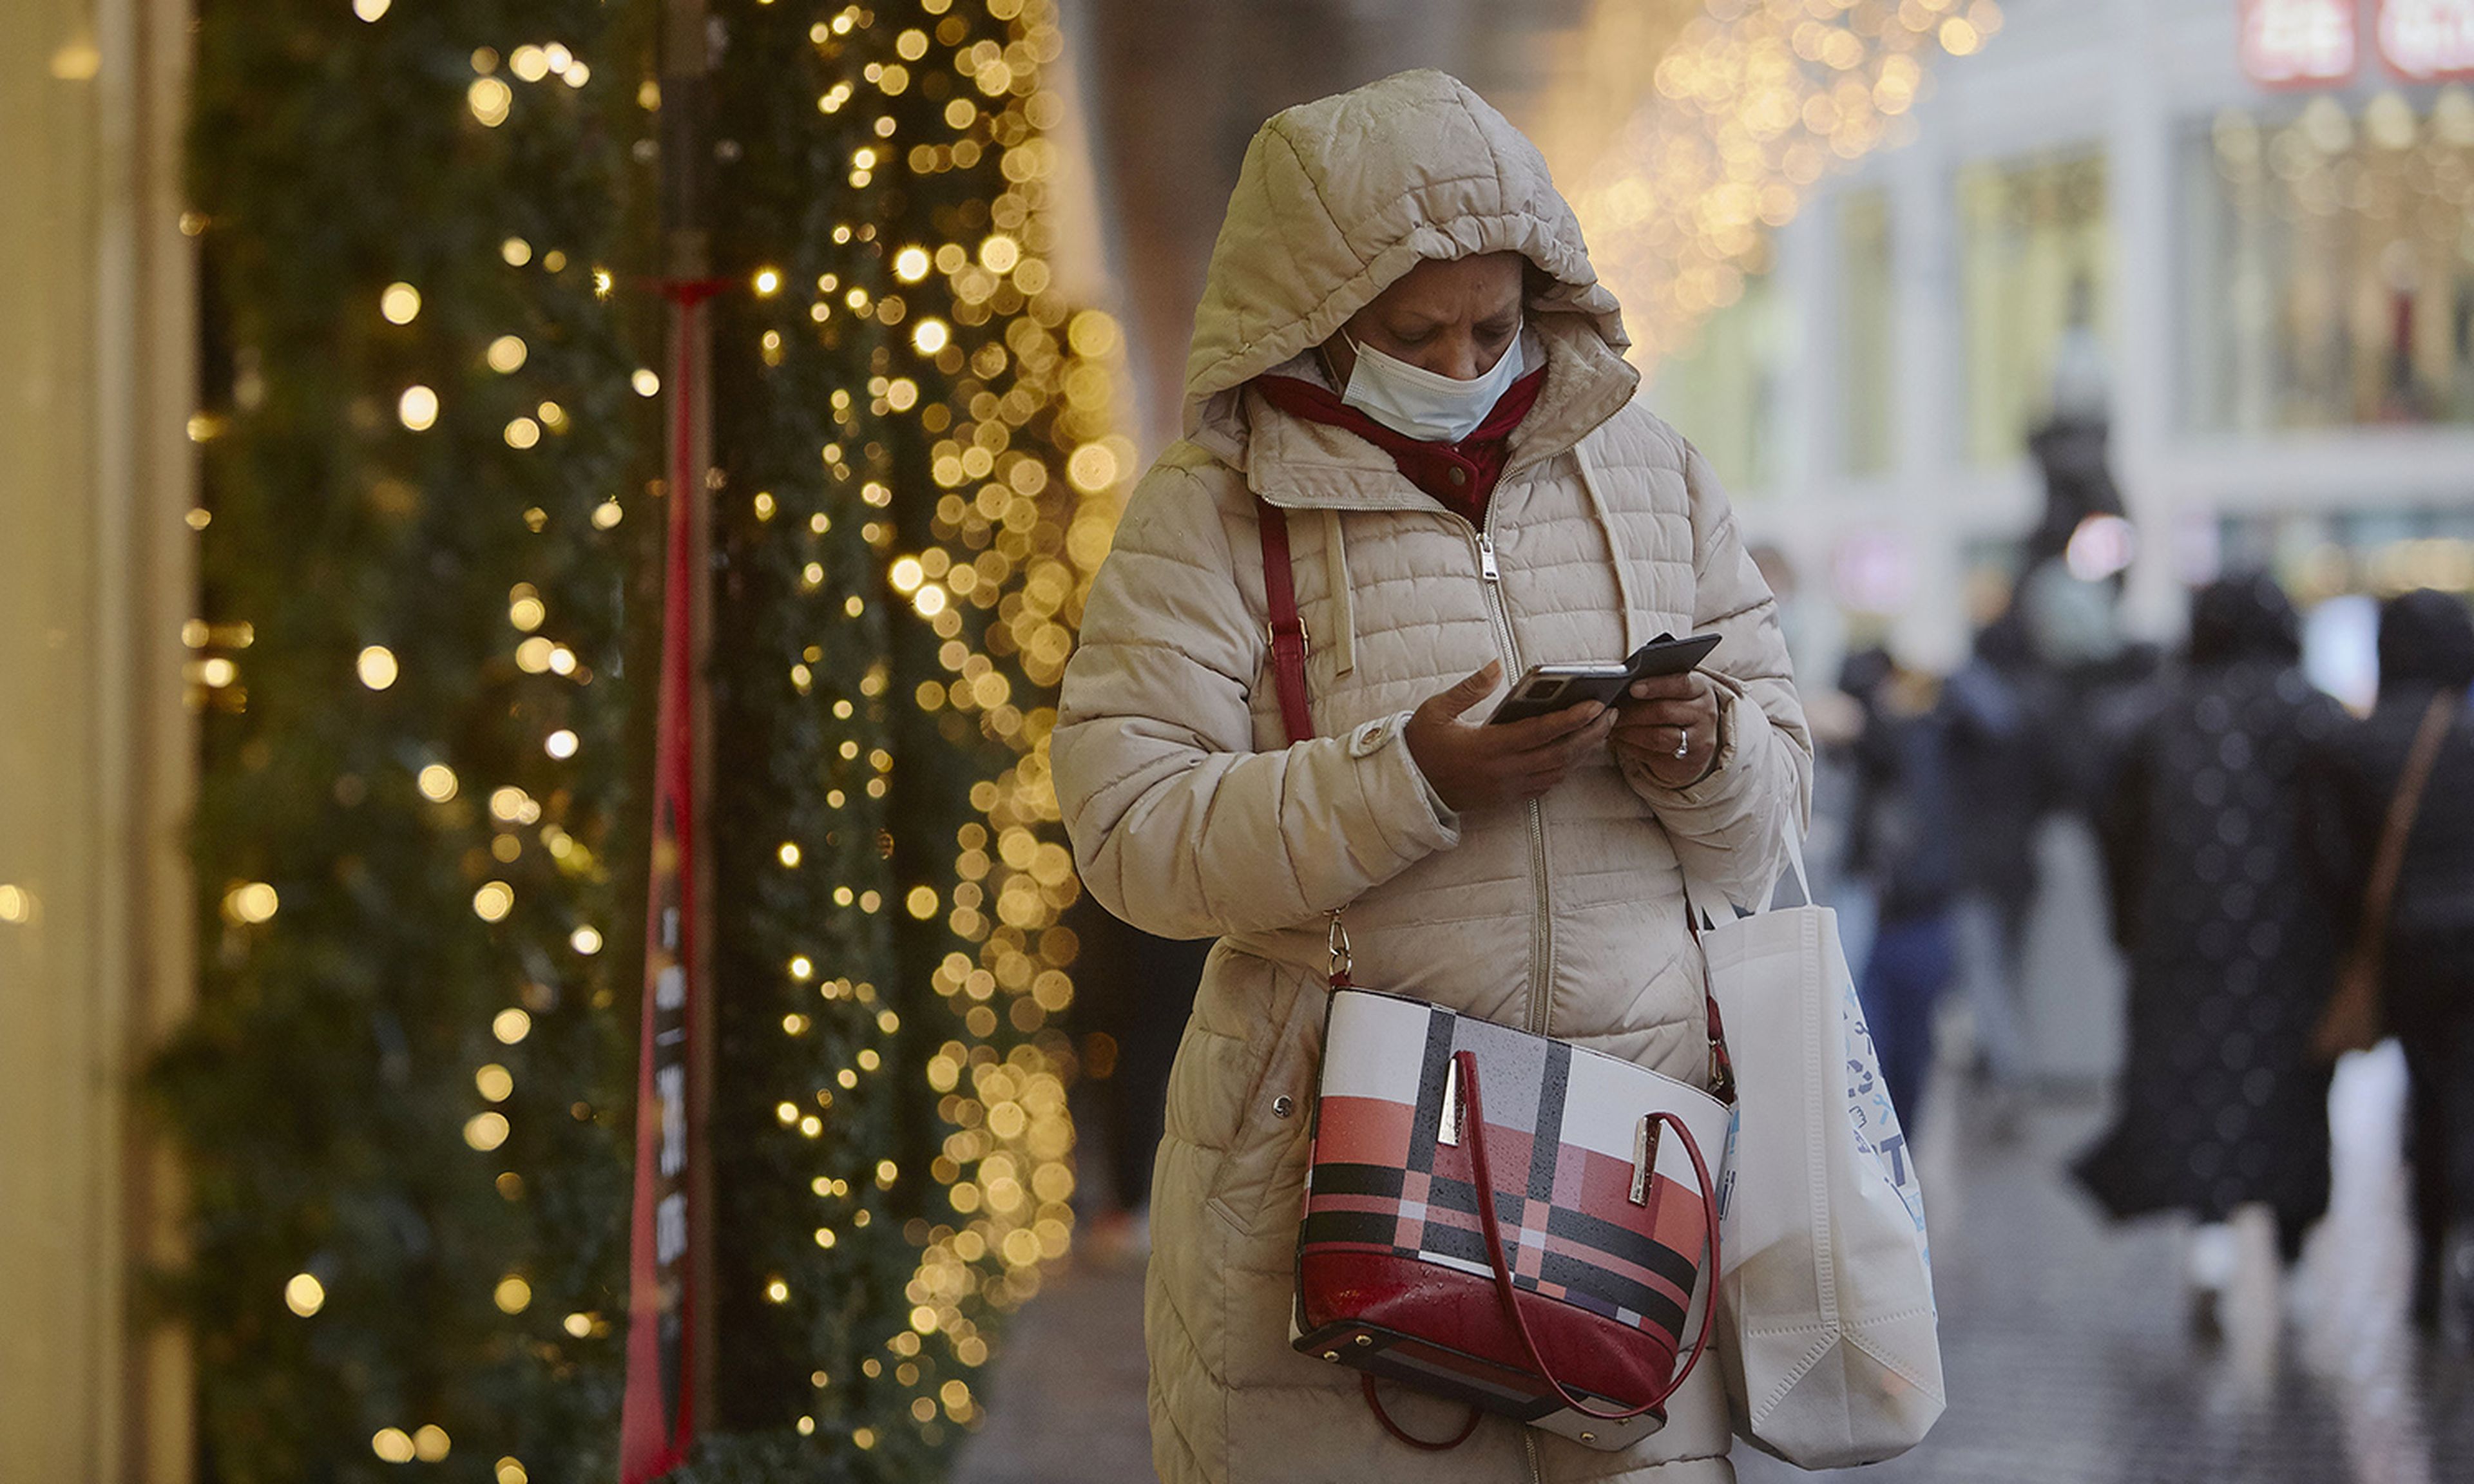 Pictured: A woman wearing a face mask eyes her smartphone outside a store on Black Friday on Nov. 26, 2021, in The Hague, Netherlands. (Photo by Pierre Crom/Getty Images)